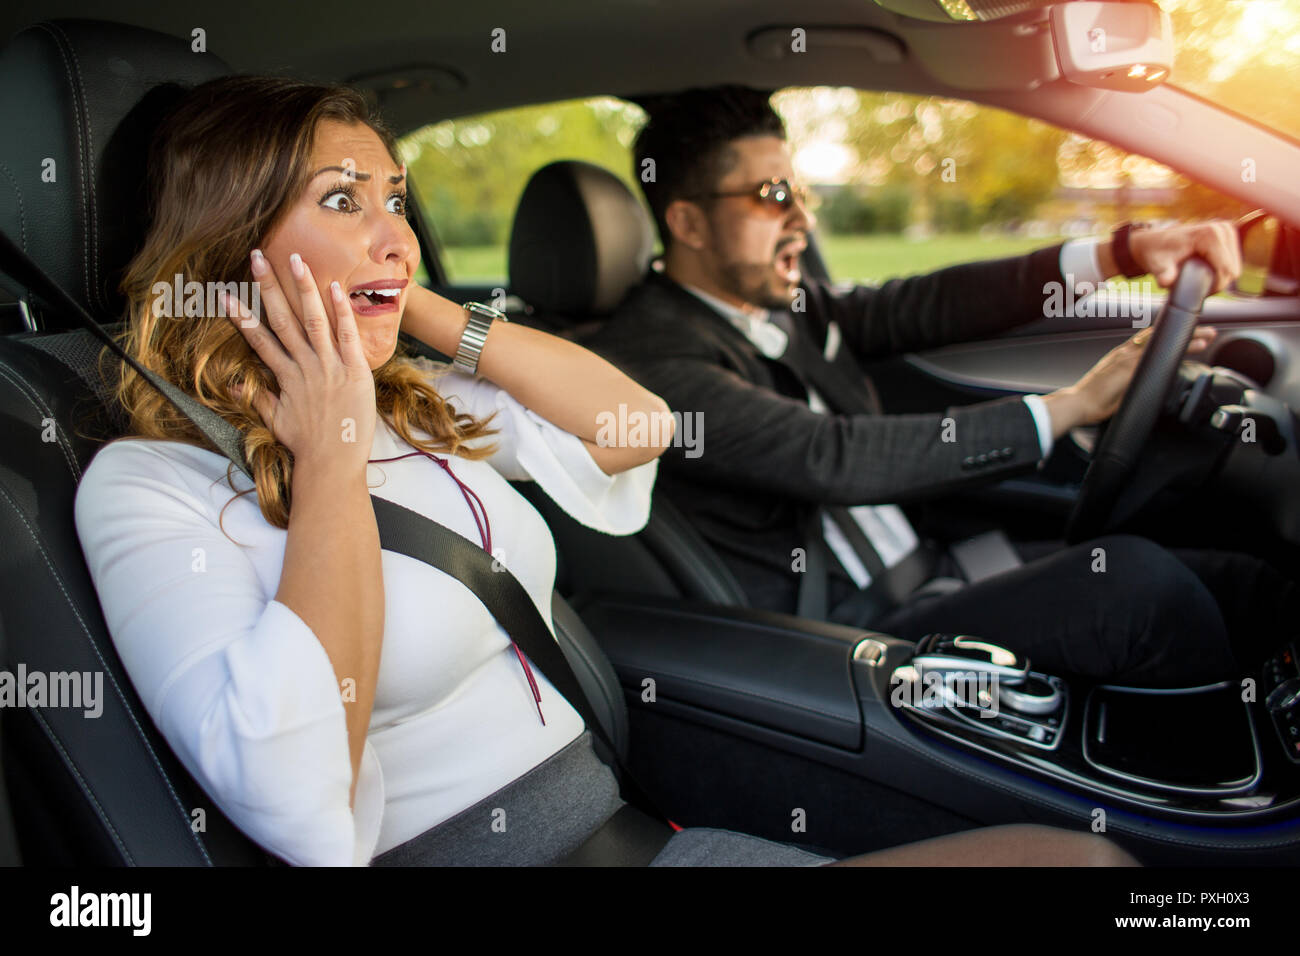 Angry business man with sunglasses driving and honking  while woman is afraid Stock Photo